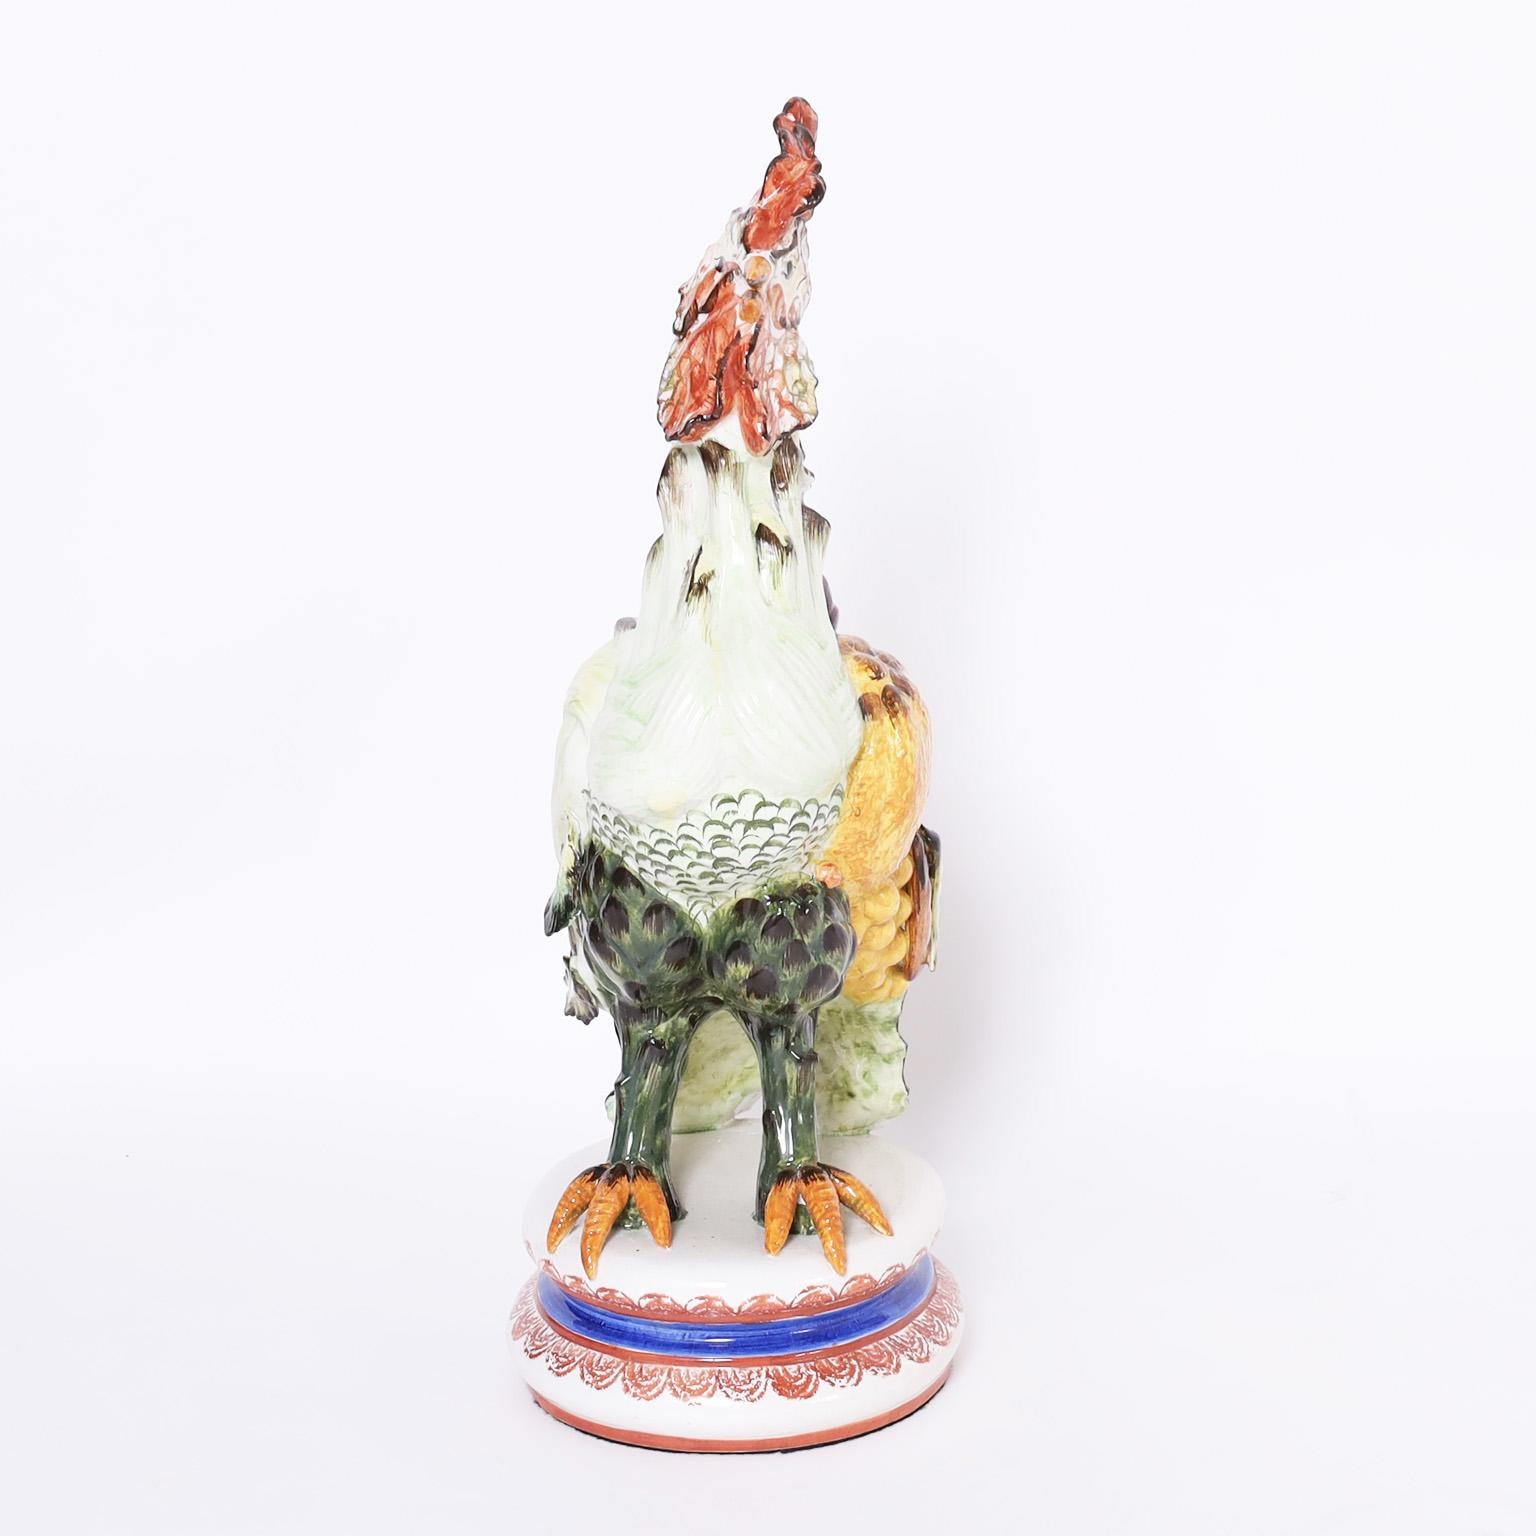 ceramic roosters for sale